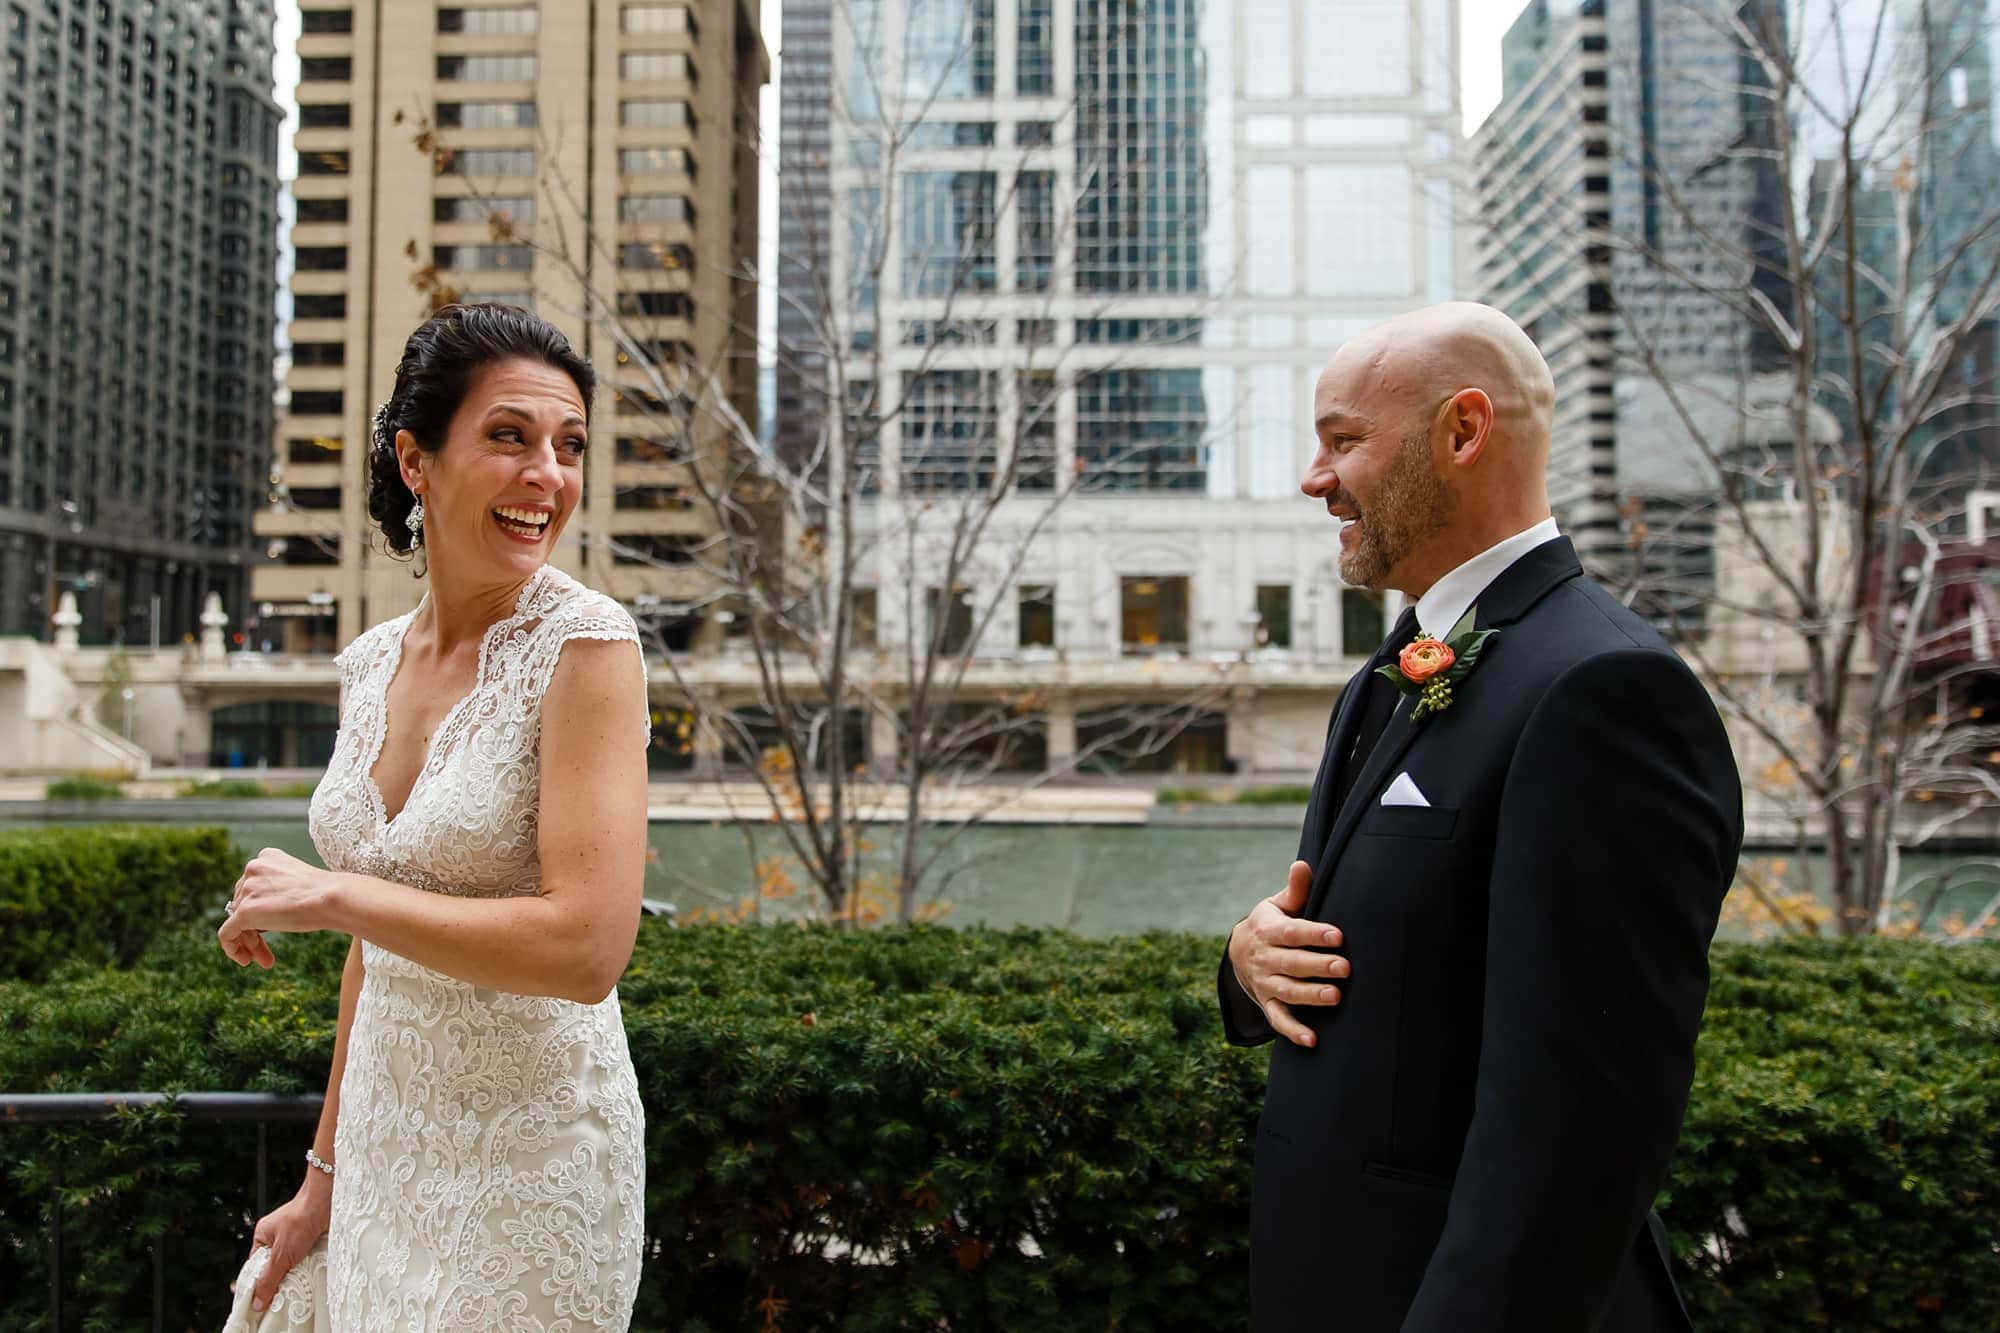 Christina and Brad see each other for the first time on their wedding day outside the Westin Chicago River North